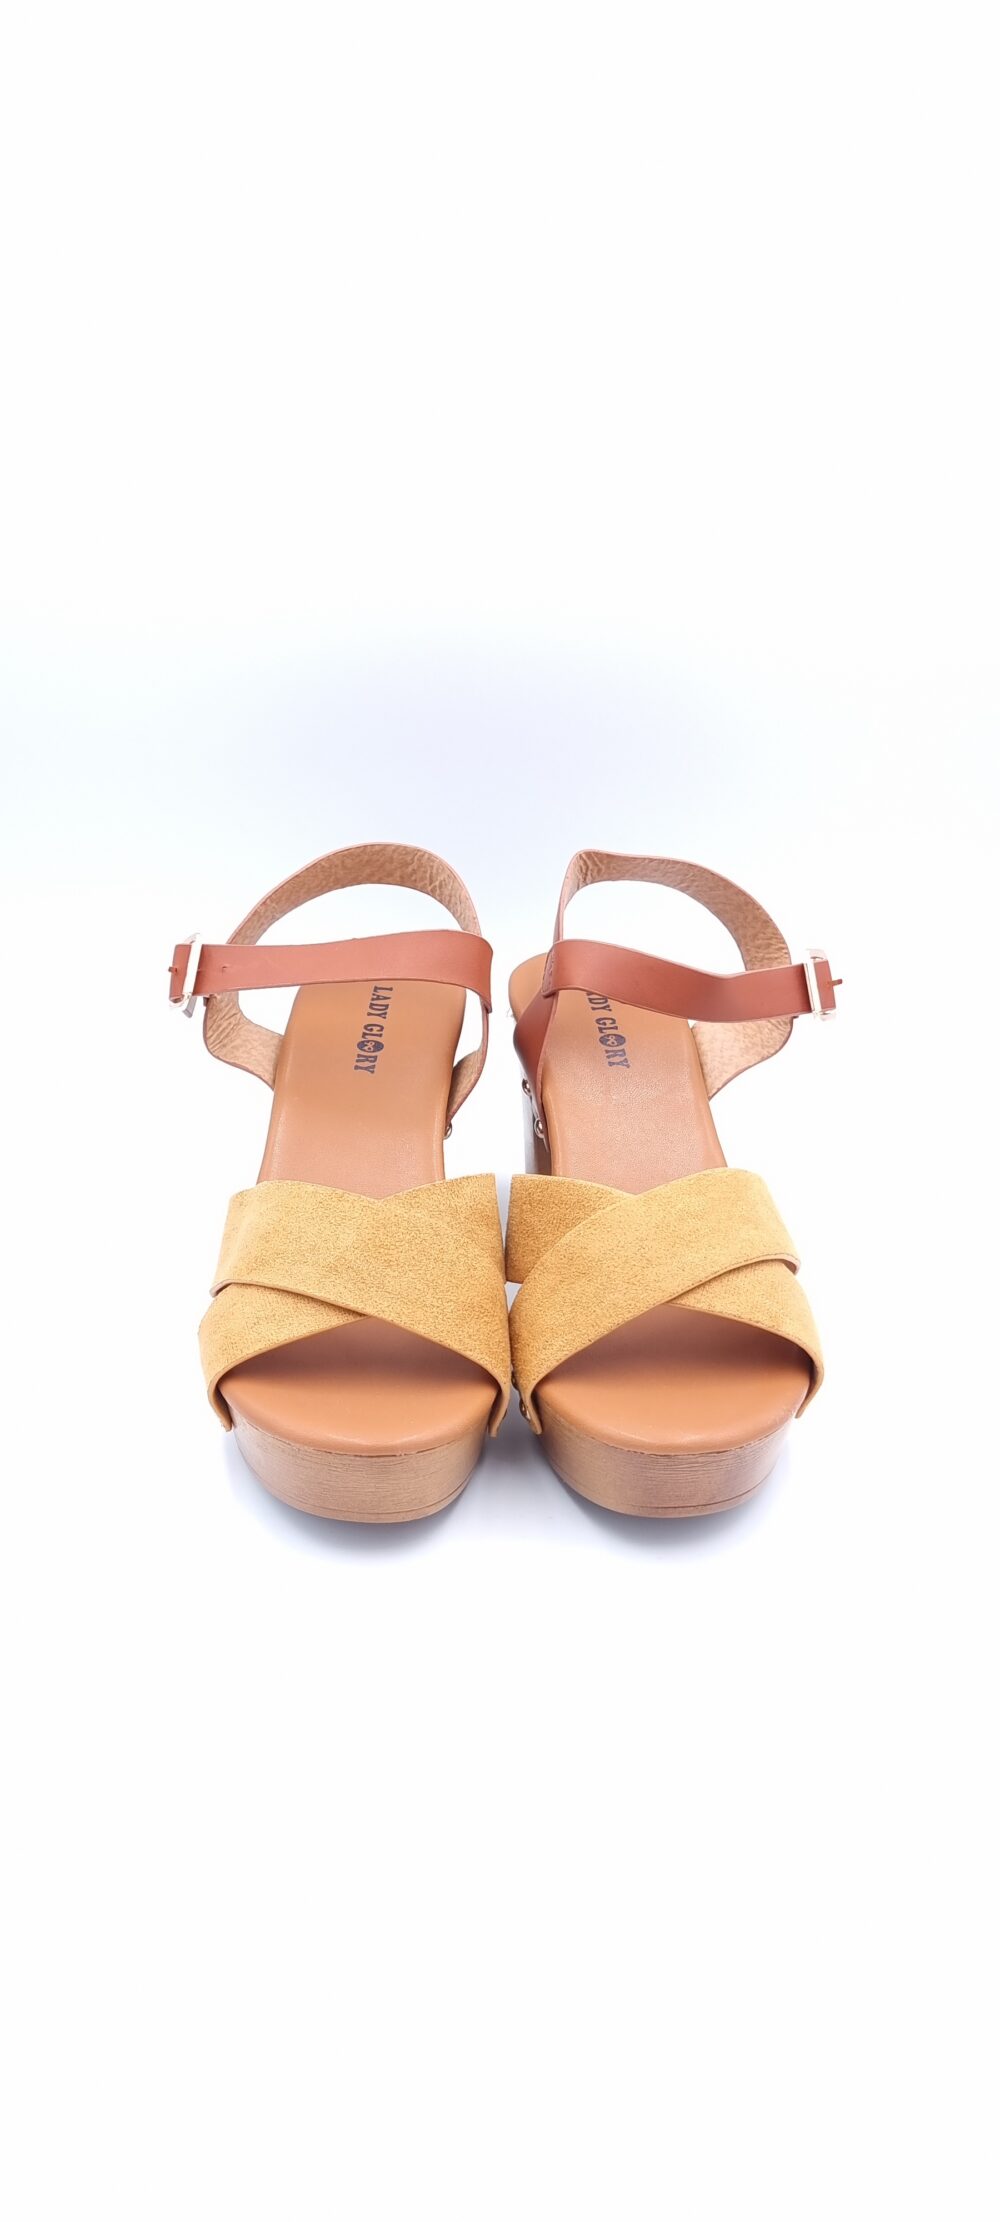 Sandal with wooden heel and cross pattern tampa